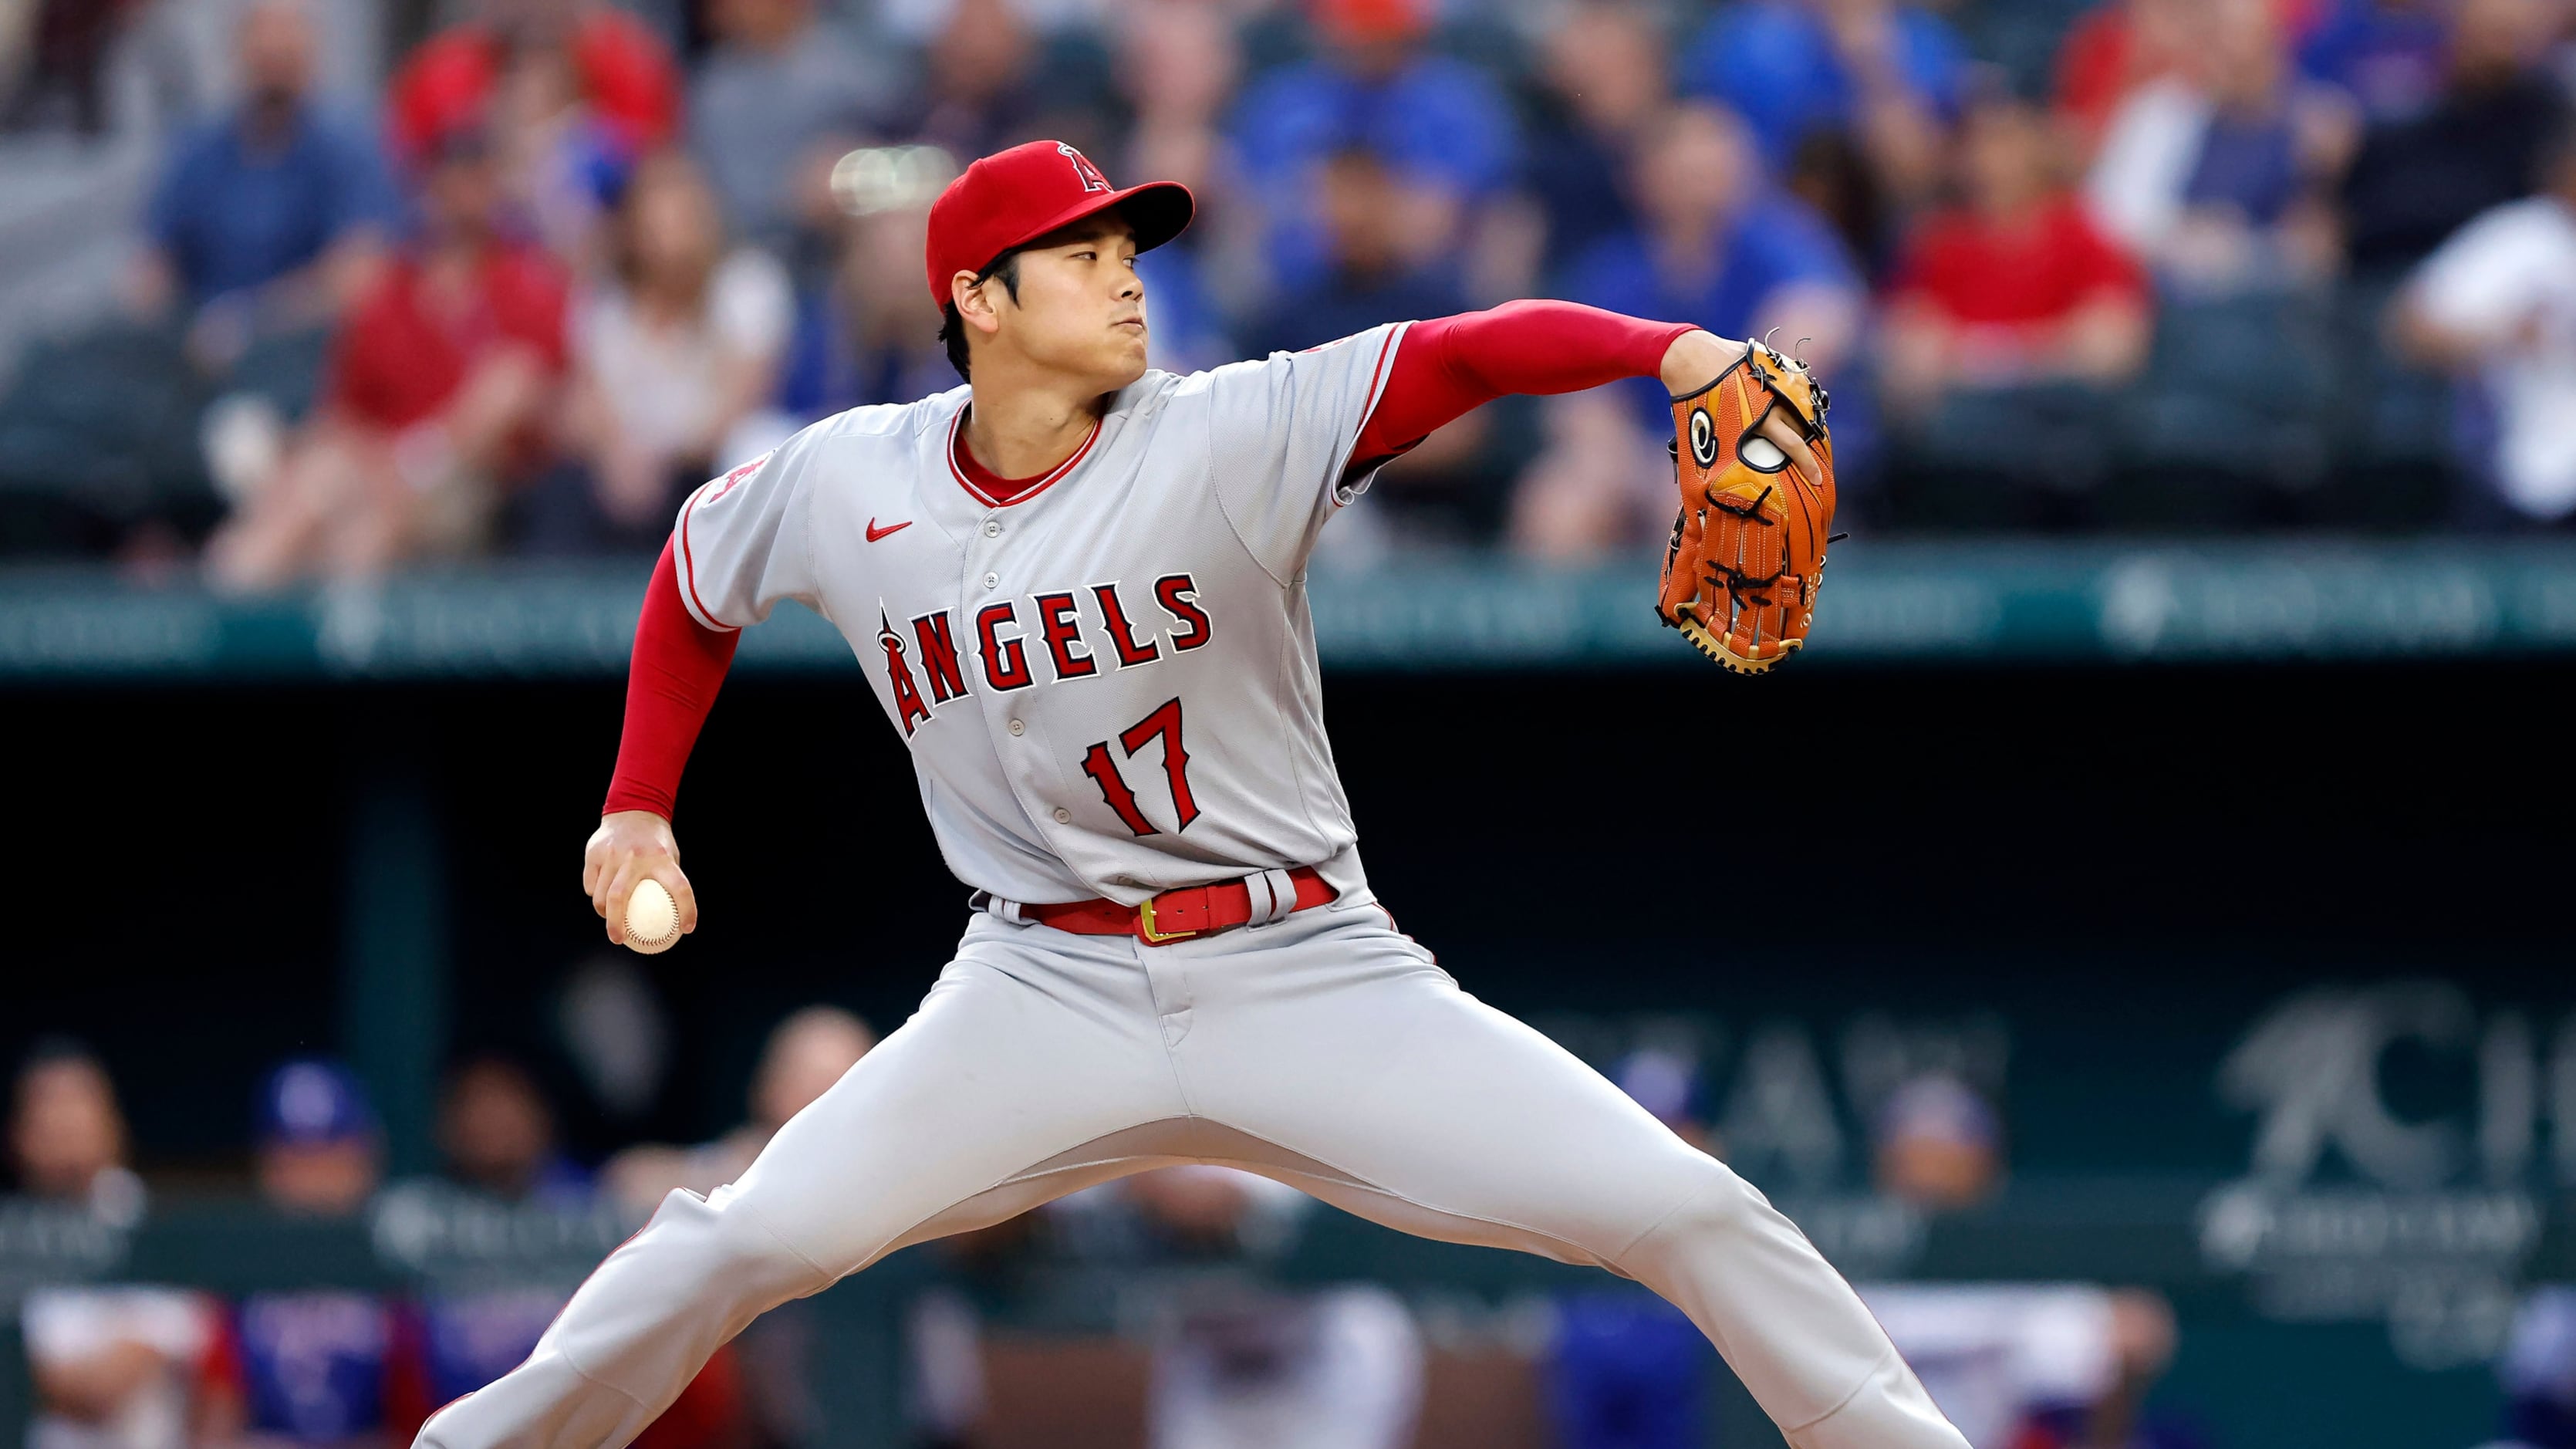 Los Angeles Angels Probable Pitchers & Starting Lineup vs. Los